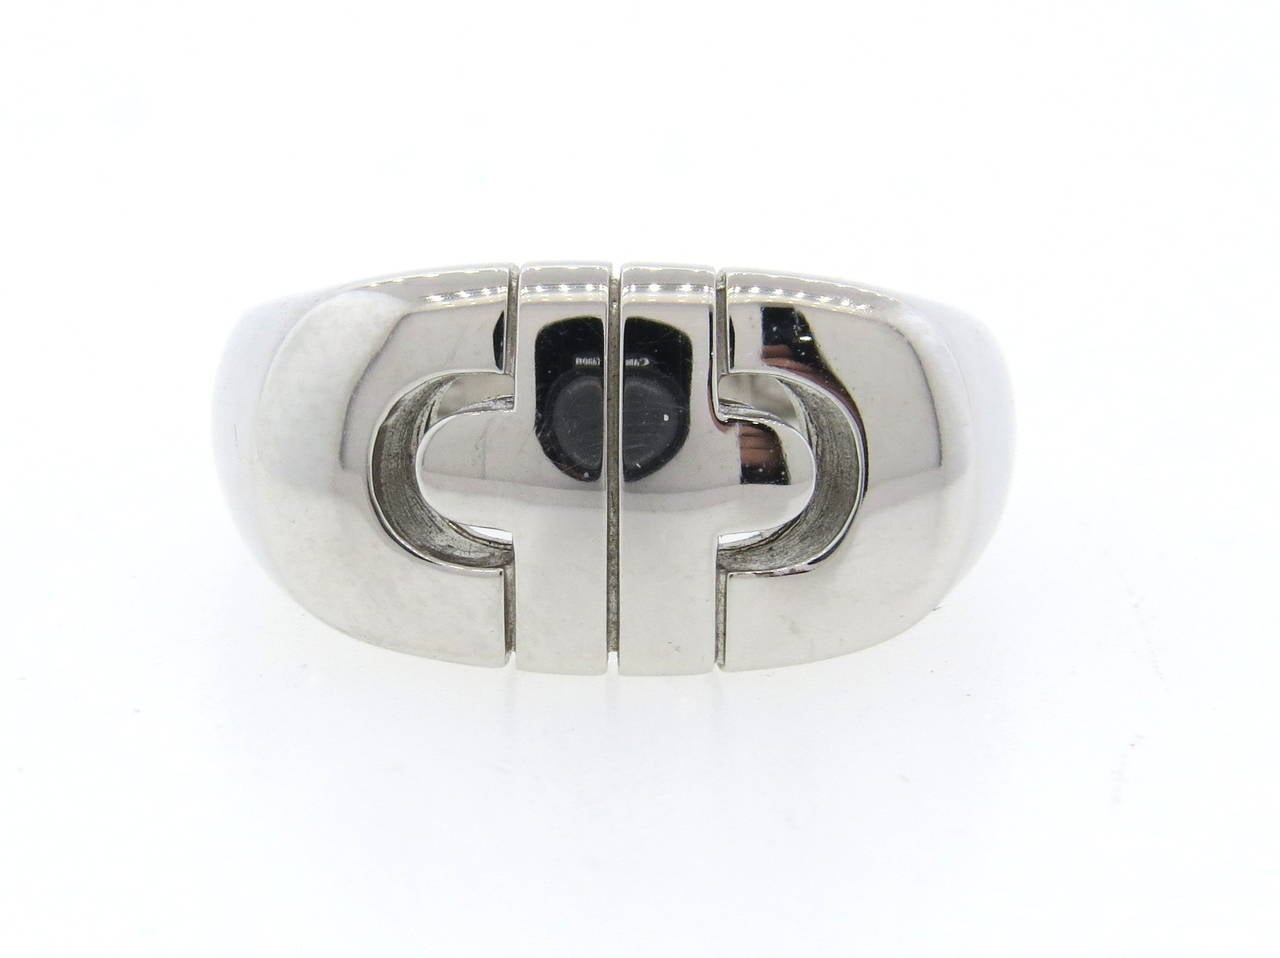 An 18k white gold ring from the Parentesi collection by Bulgari.  The ring is a size 8 and measures 11mm wide at the widest point.  The weight of the ring is 8.64 grams.